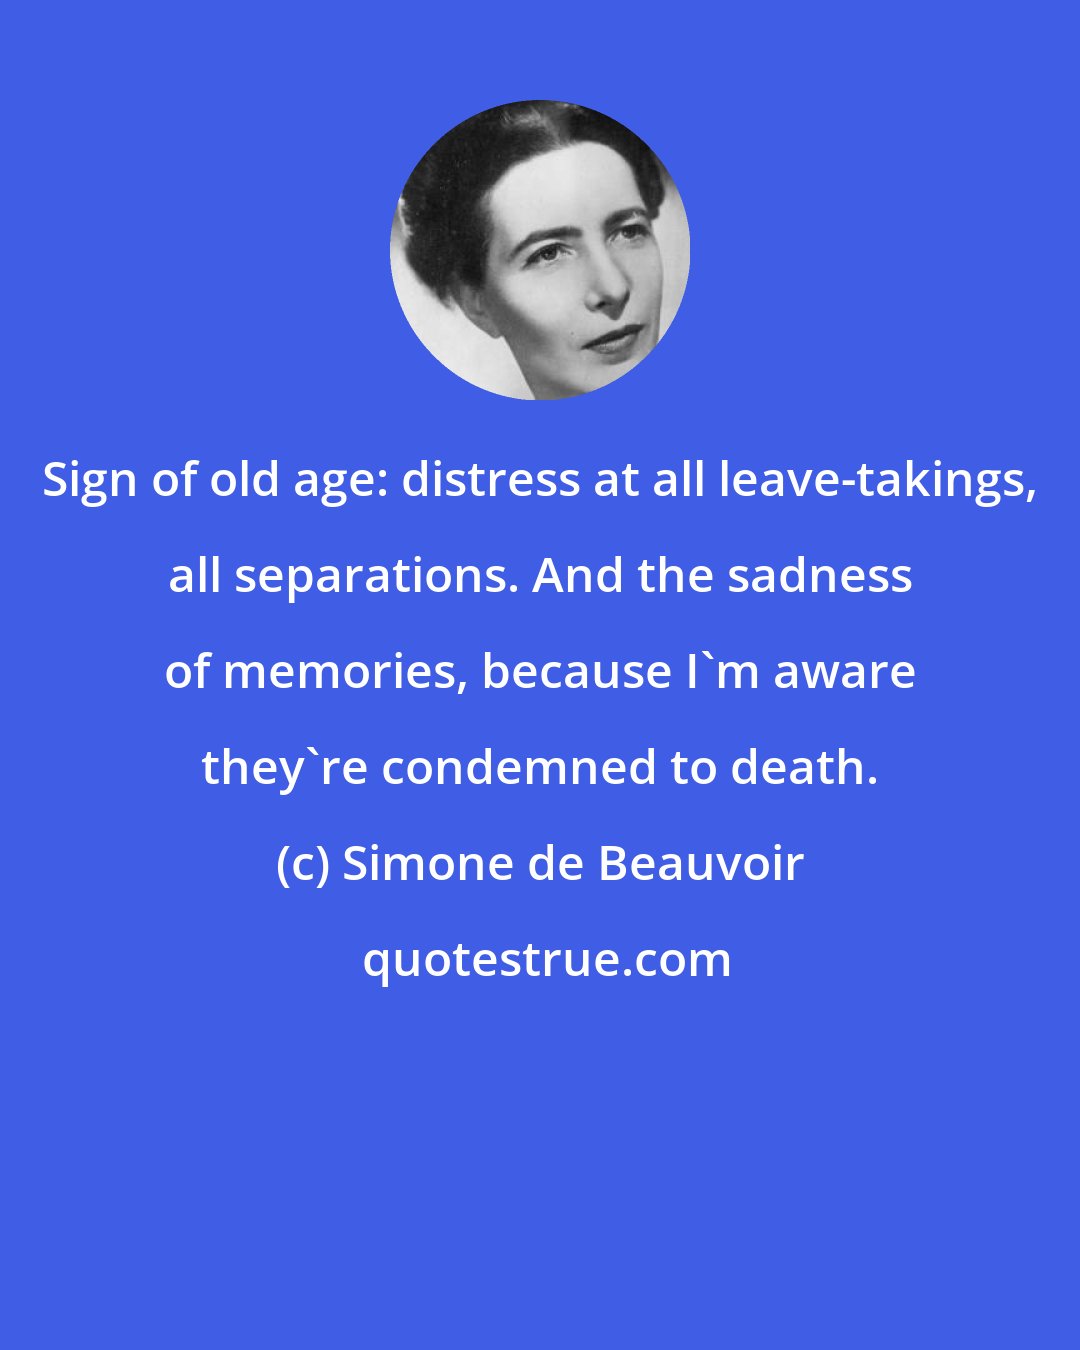 Simone de Beauvoir: Sign of old age: distress at all leave-takings, all separations. And the sadness of memories, because I'm aware they're condemned to death.